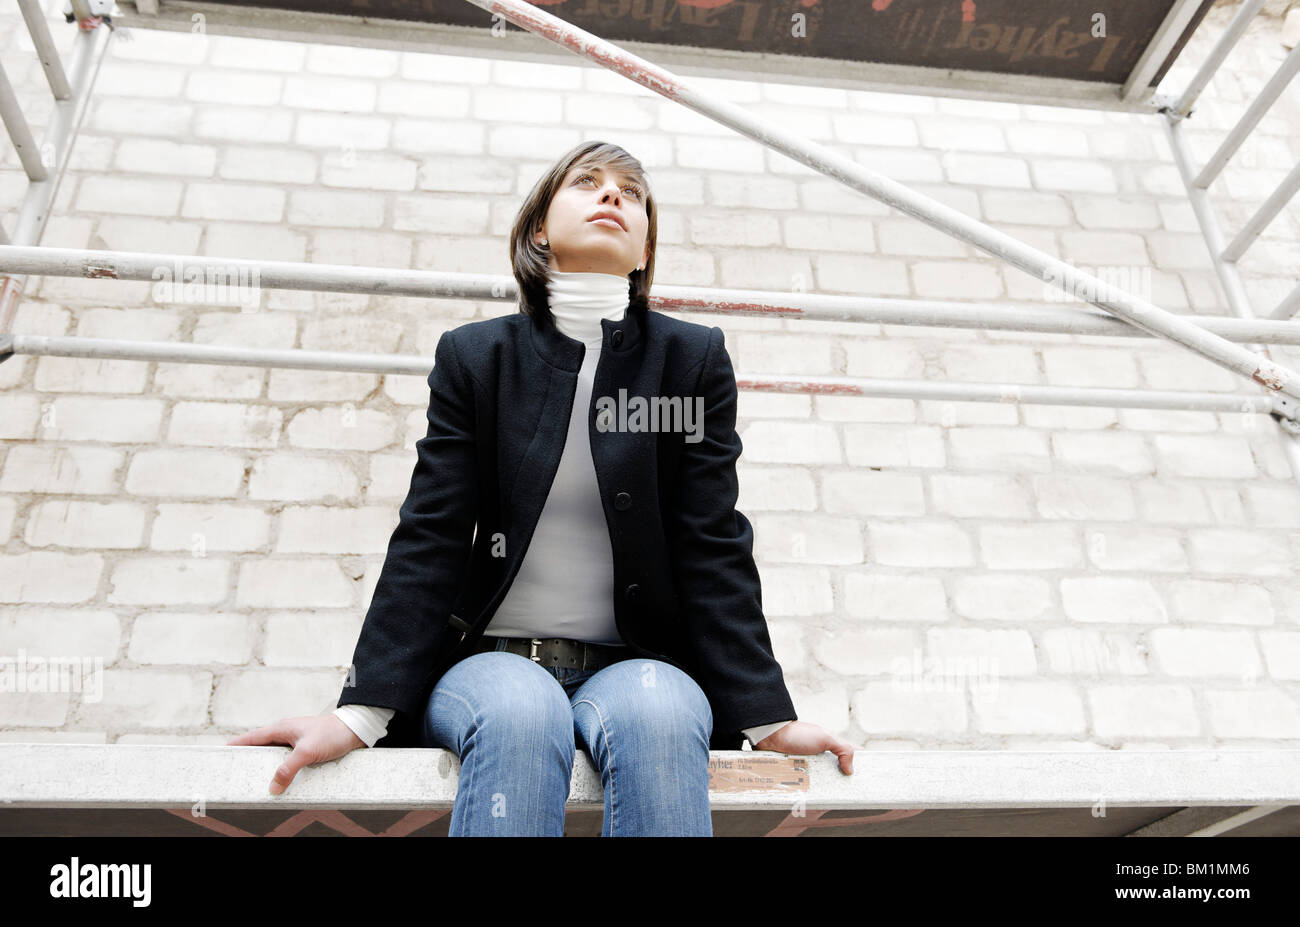 Young brunette woman, 25 years, sitting on scaffolding, looking thoughtful Stock Photo